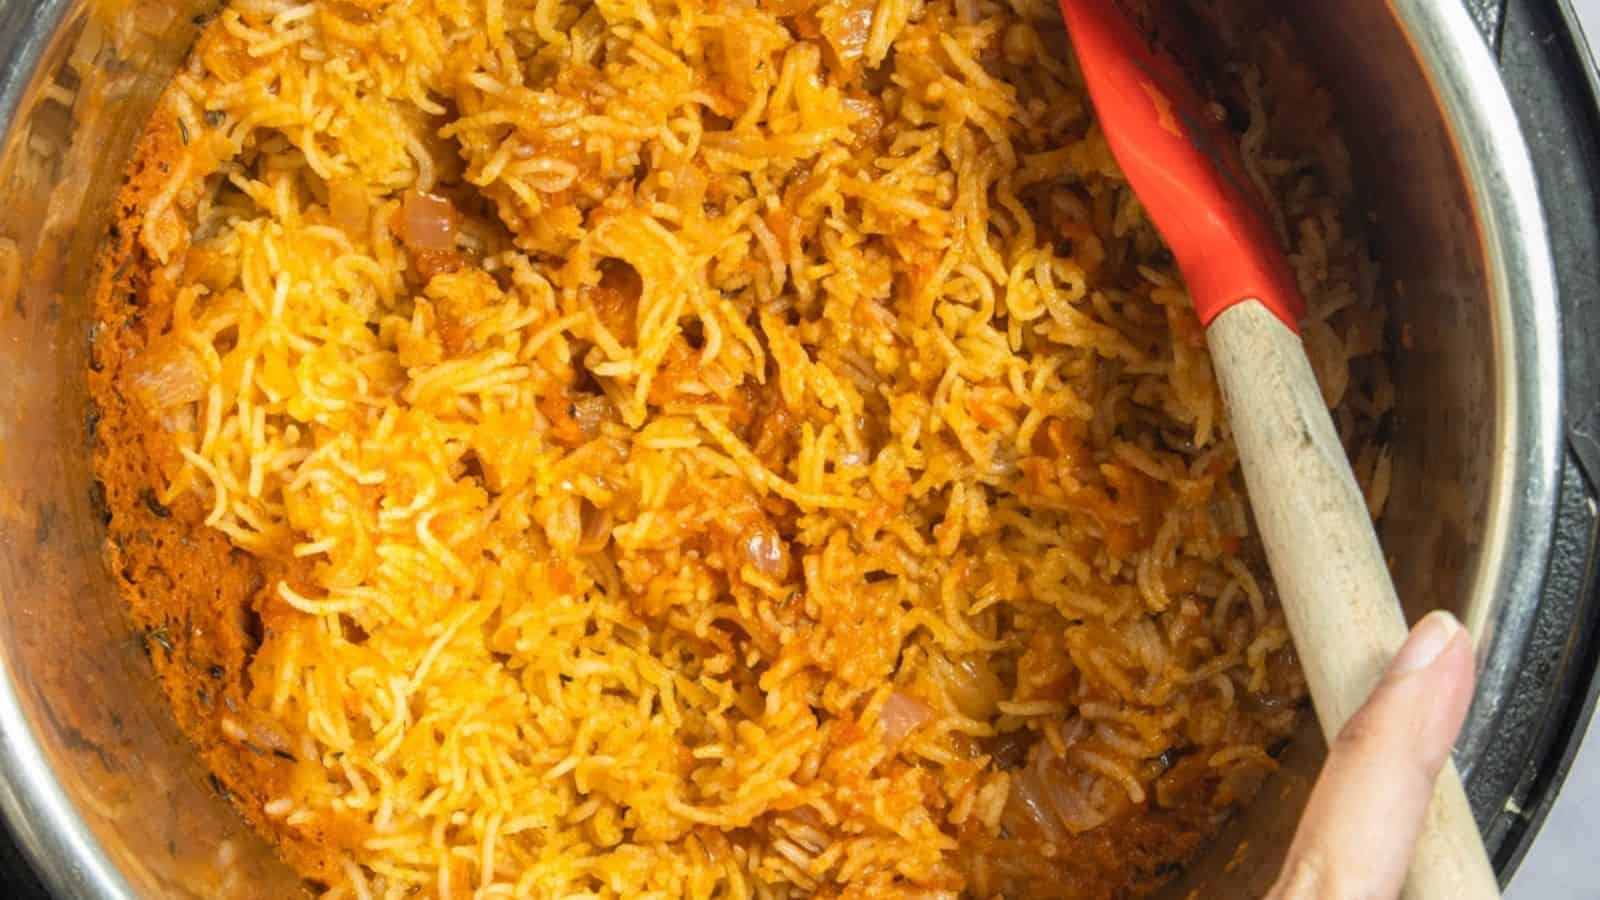 A close-up of a pot with cooked jollof rice with a person's hand holding a red spatula.